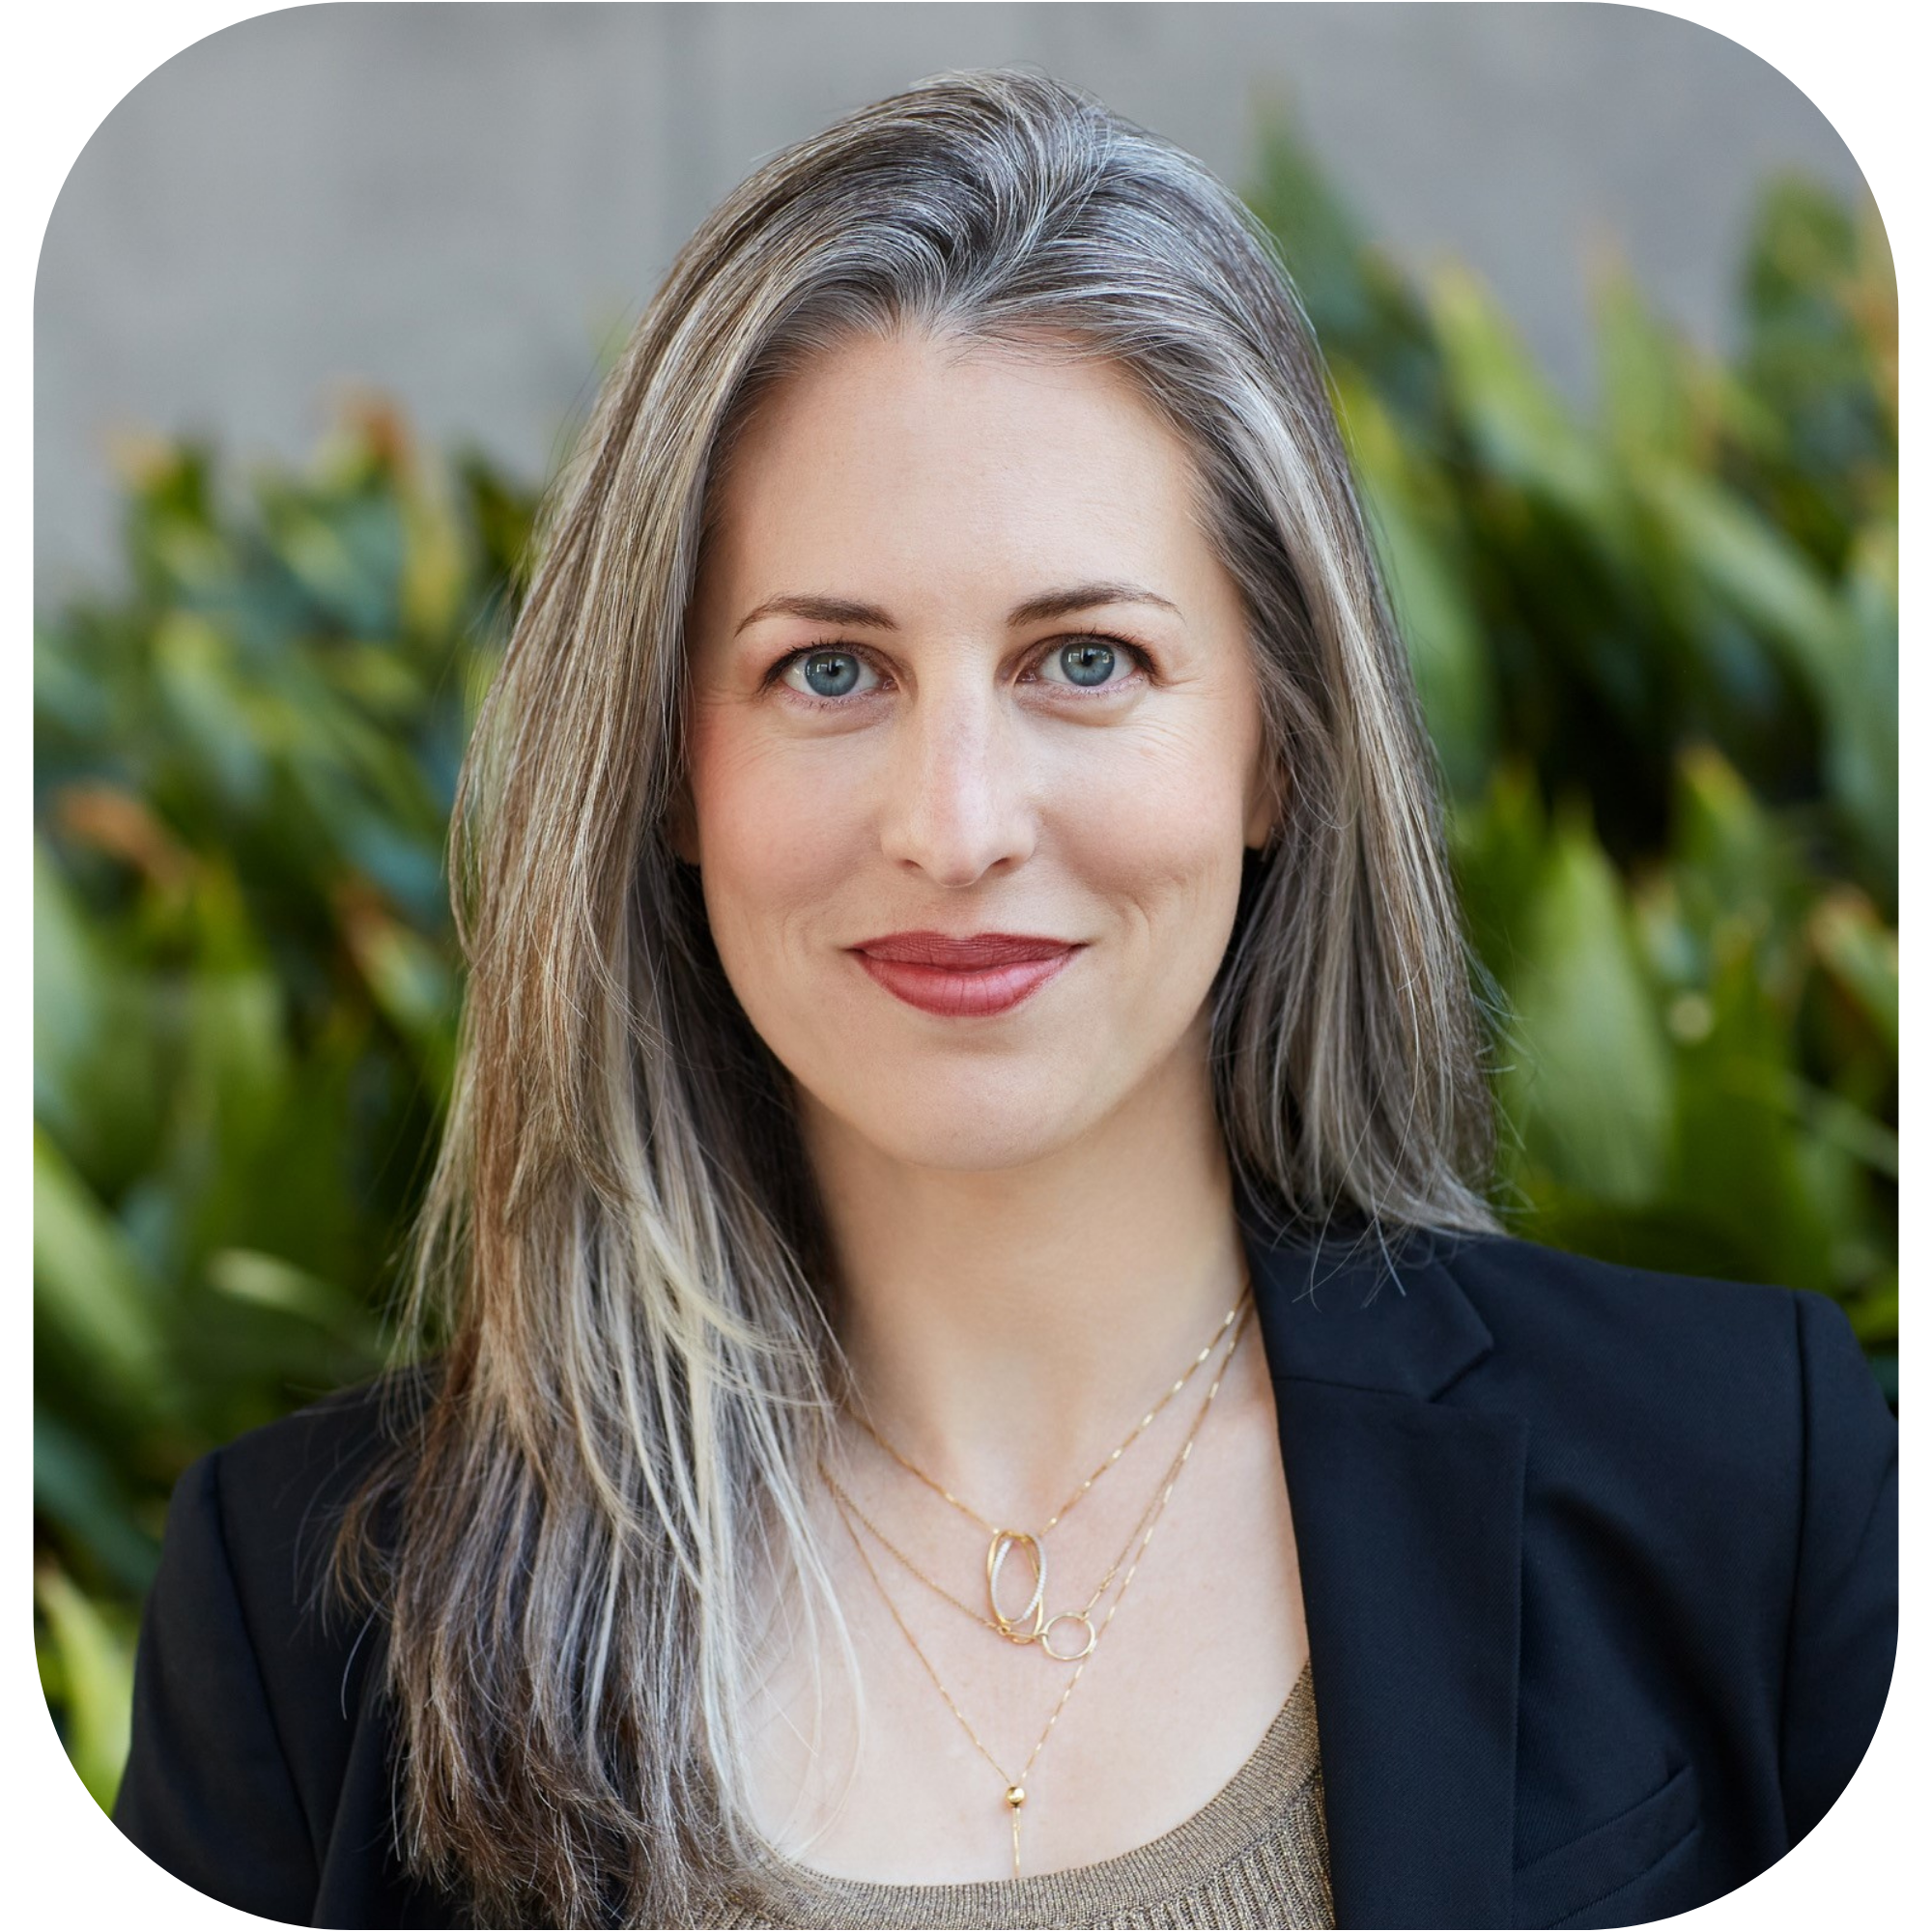 Brynn Barineau is a white woman with long, straight gray hair. She's wearing a dark blazer over a dark beige shirt and she's standing in front of vibrant green bushes.